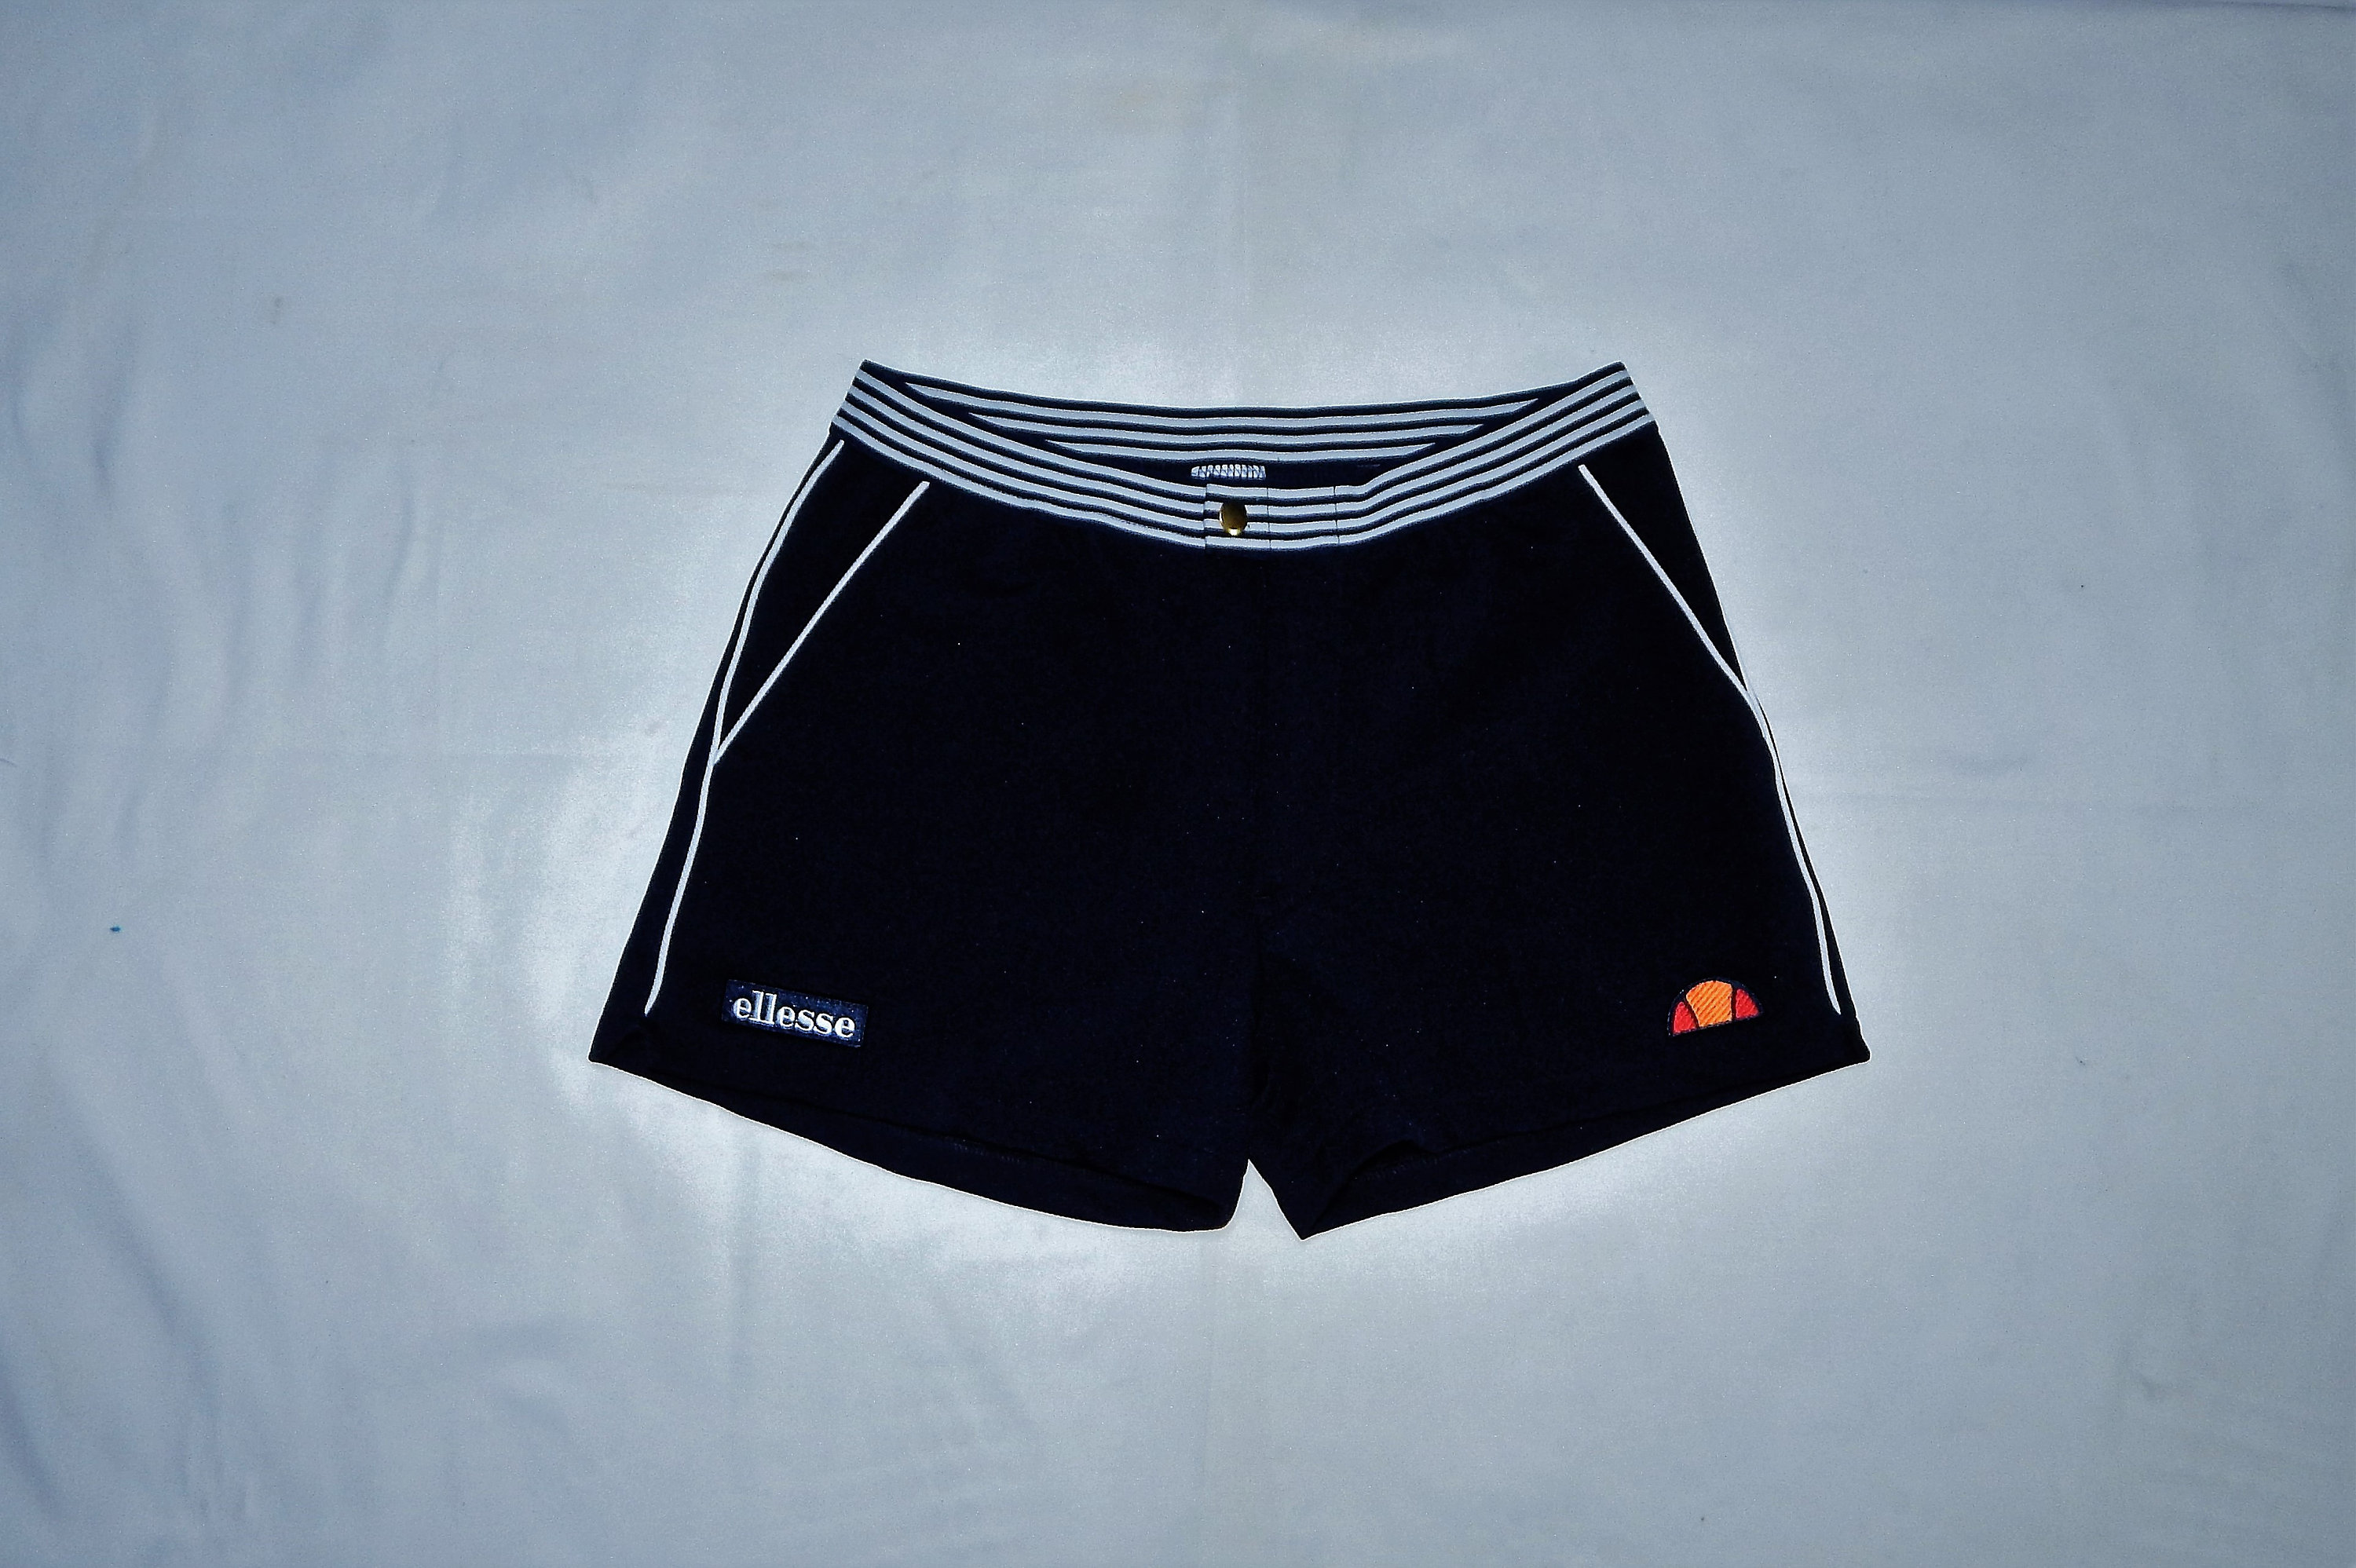 ELLESSE Vintage 90s New Without Tags Rare Adults' Tennis - Etsy